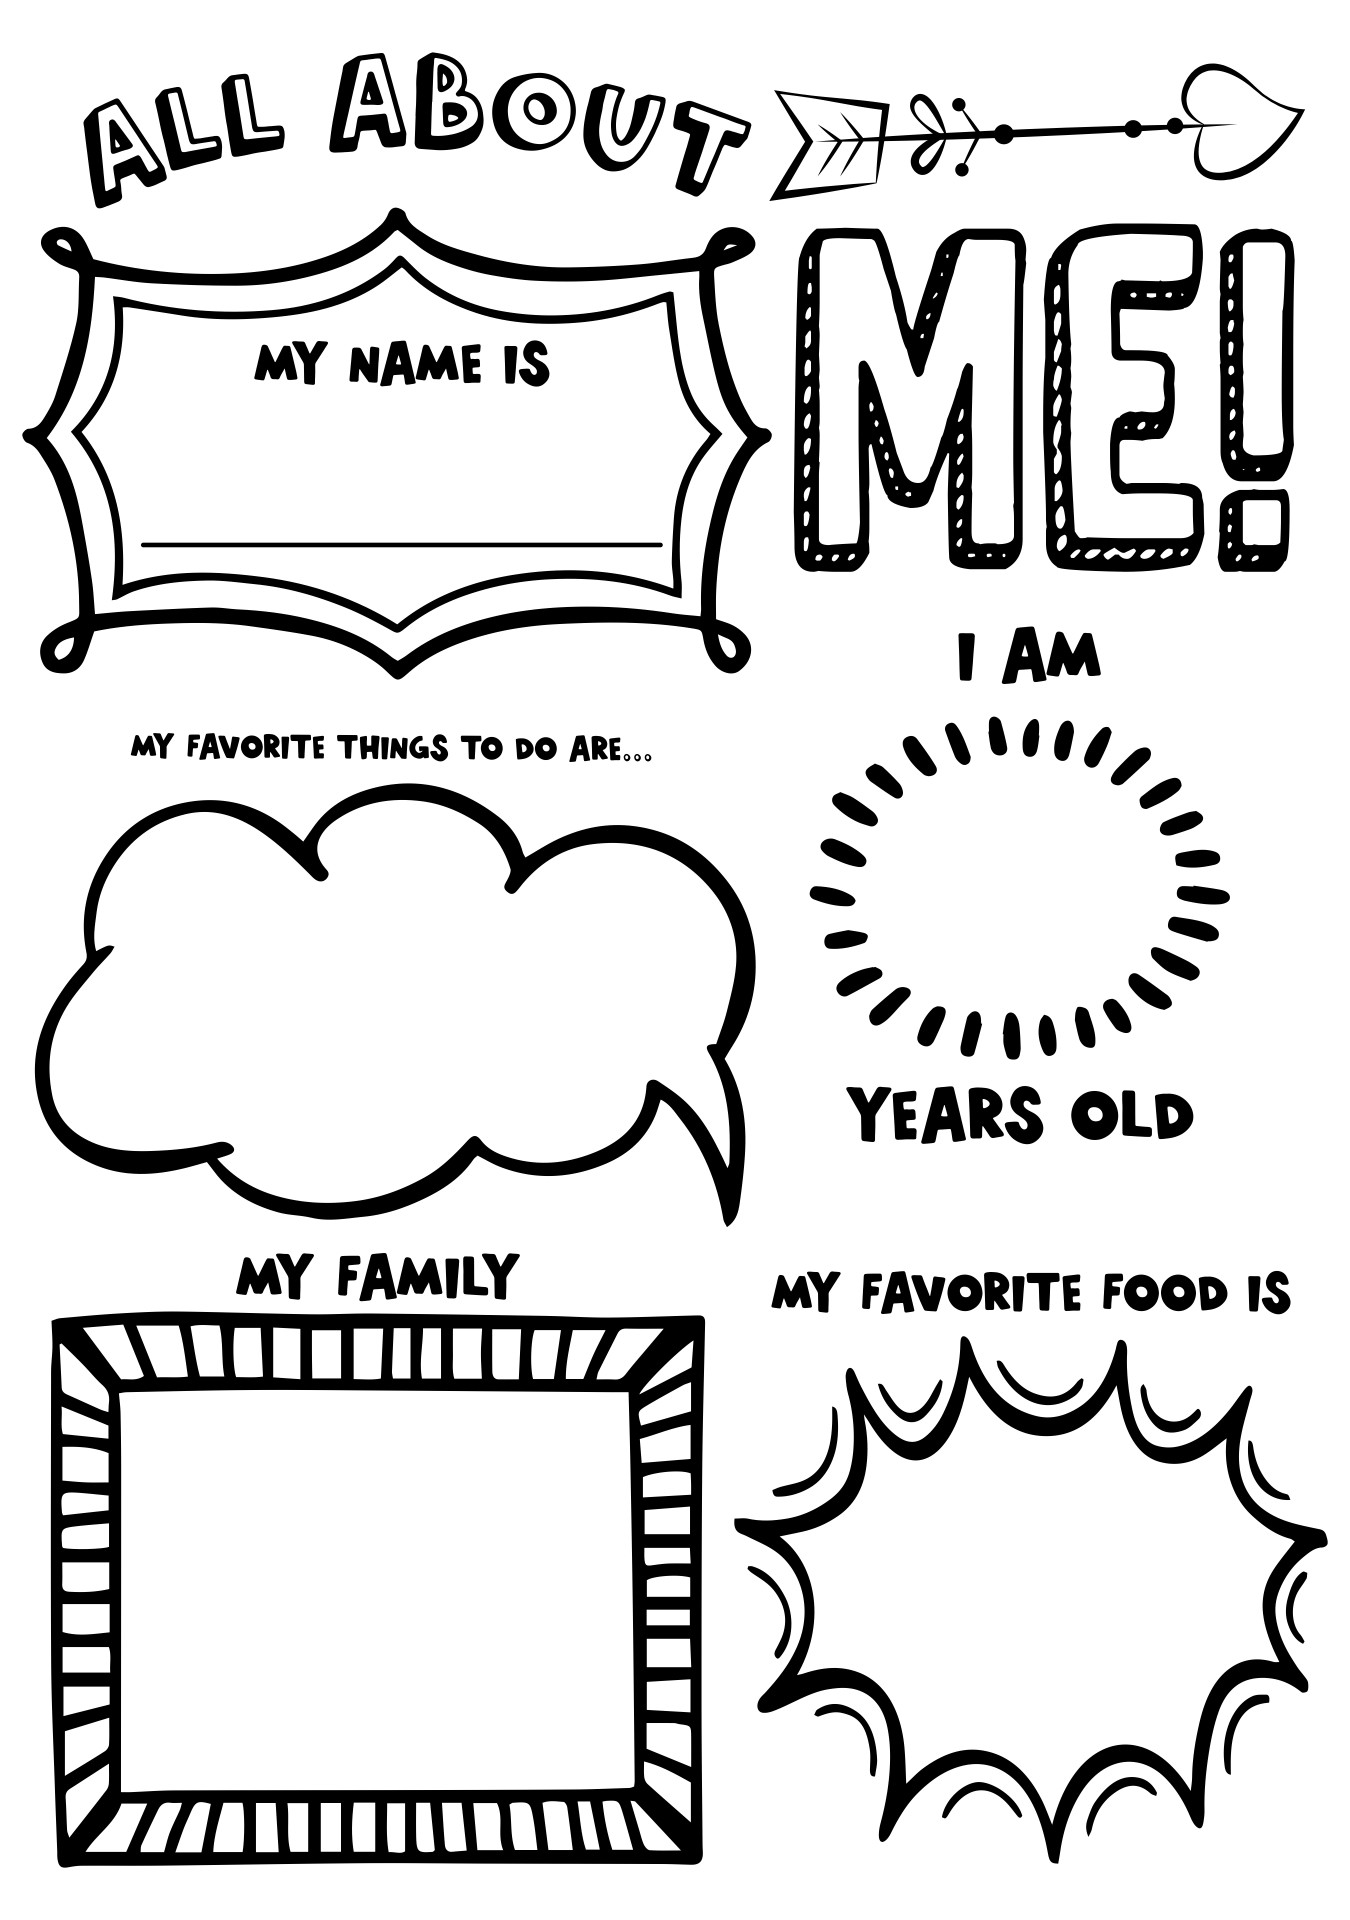 All About Me Bio Sheets For Children